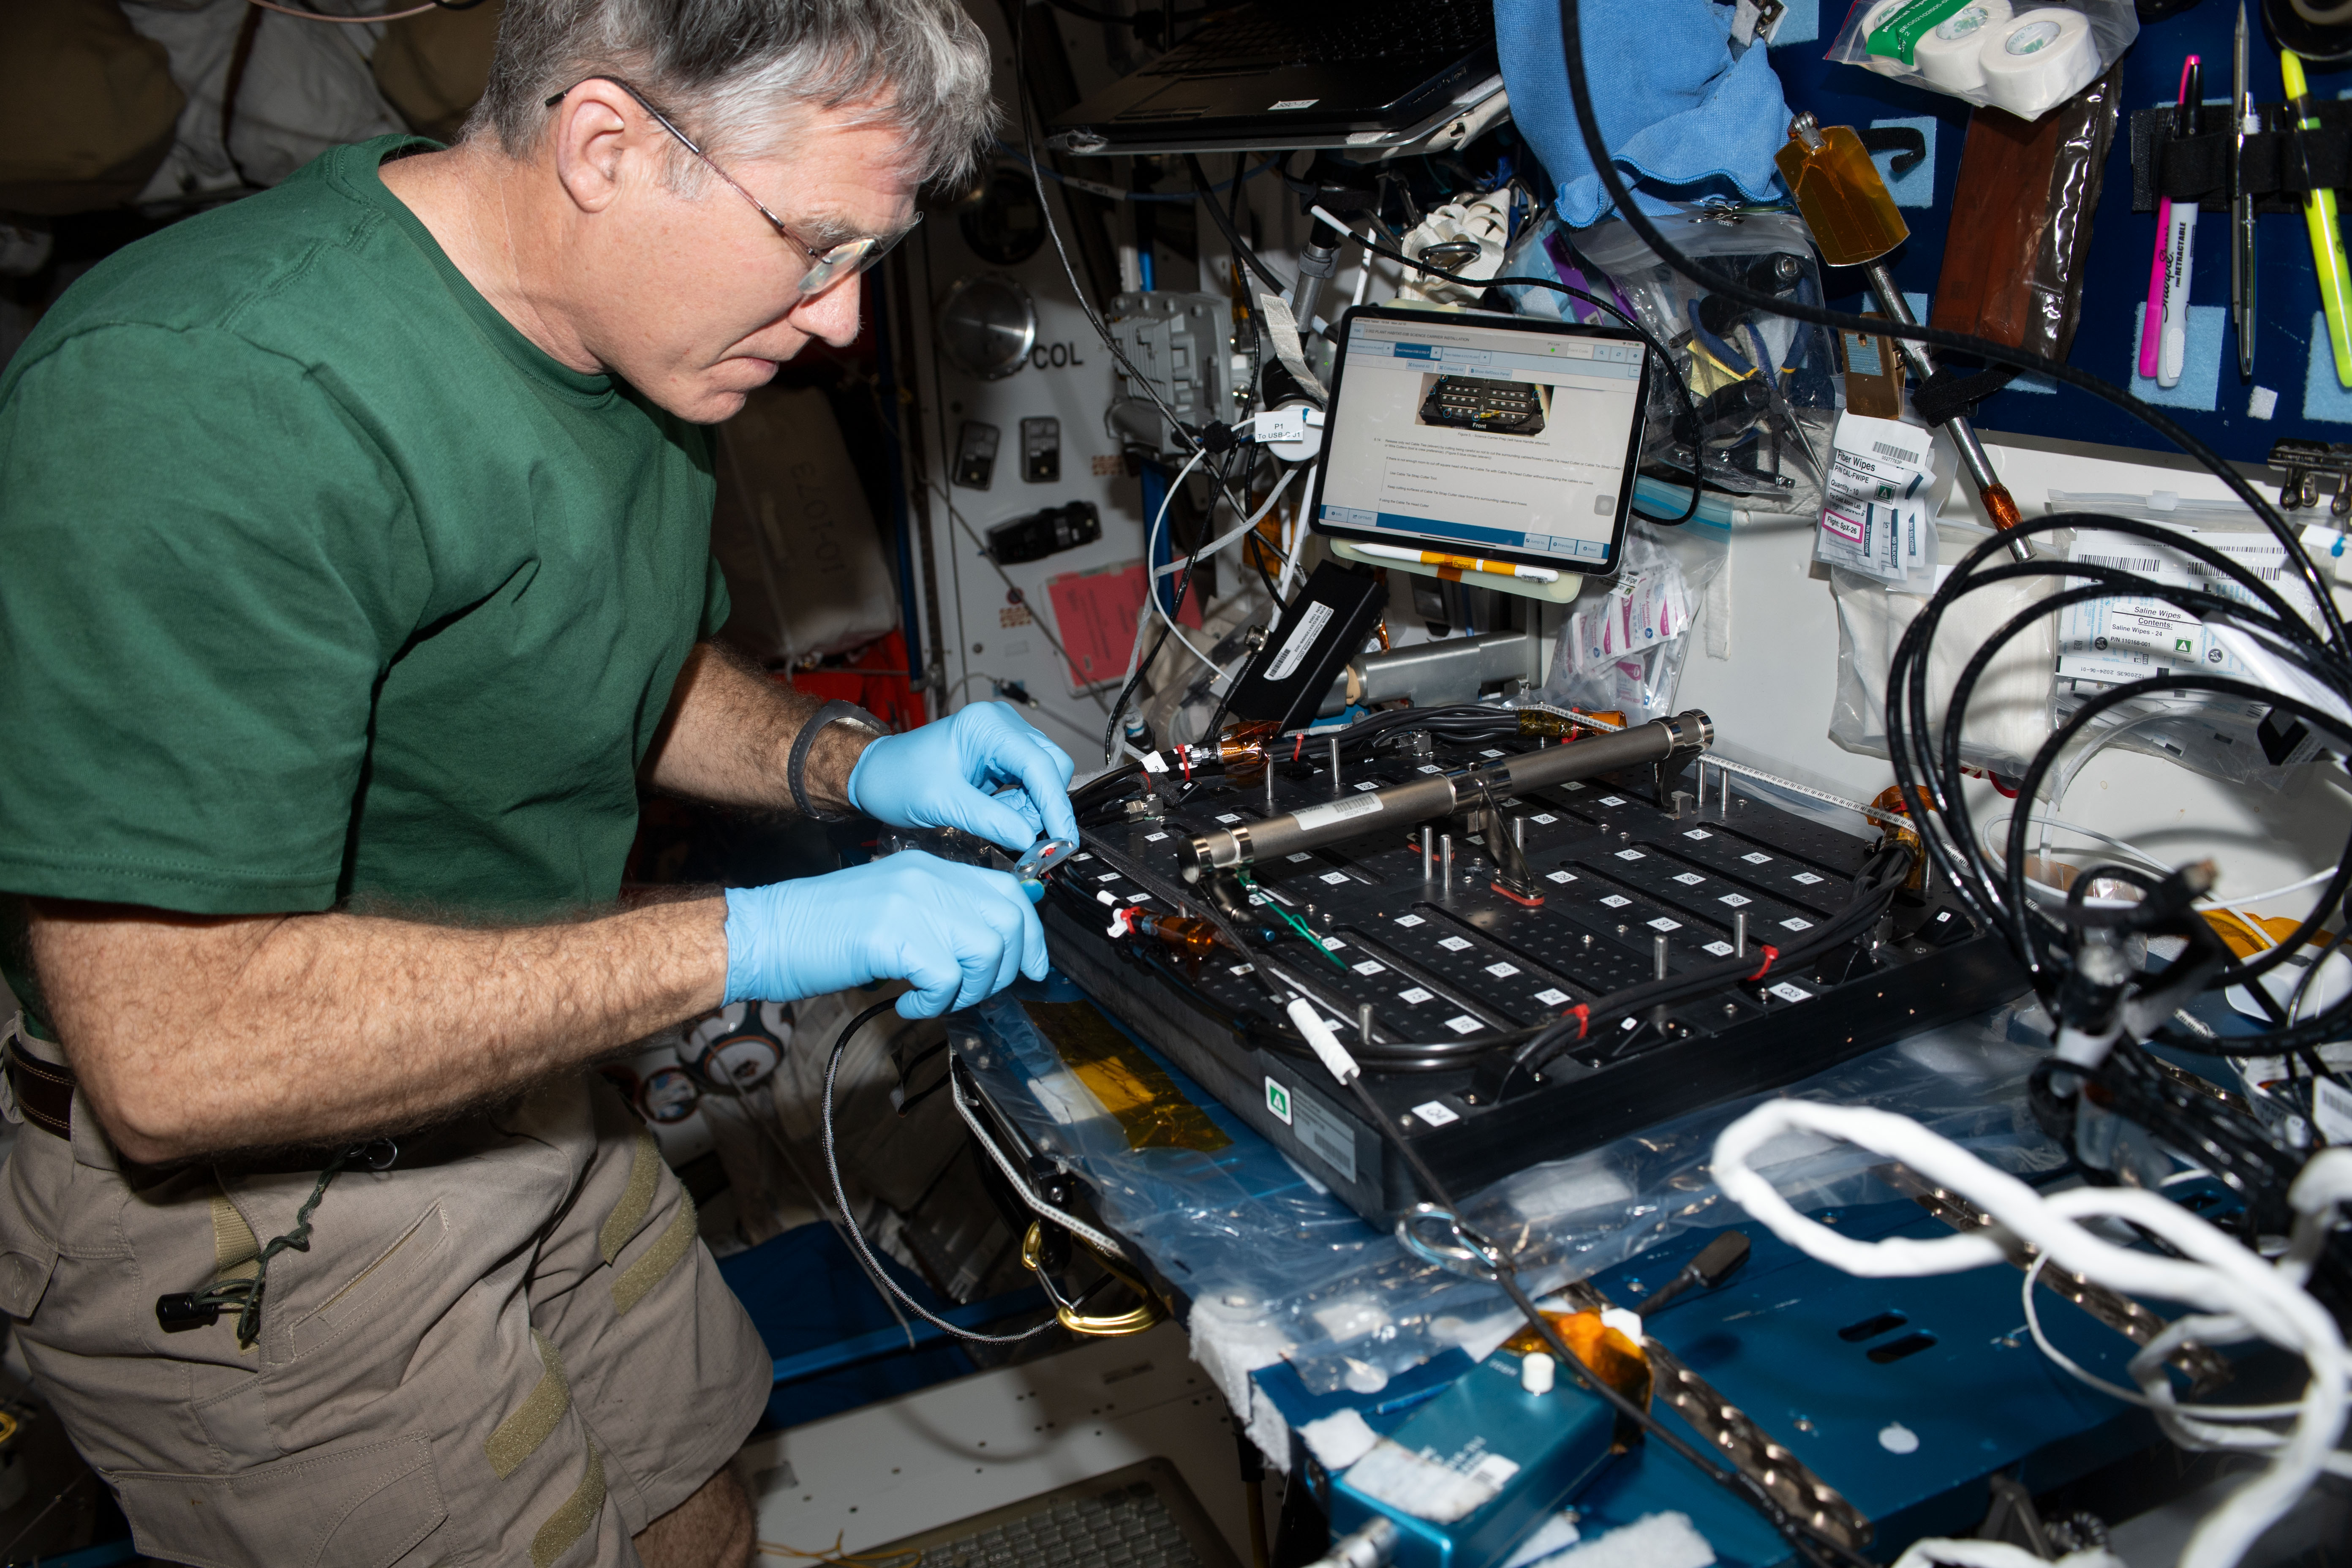 Join NASA to Discuss High-Rate Laser Comms Demo, Space Station Science